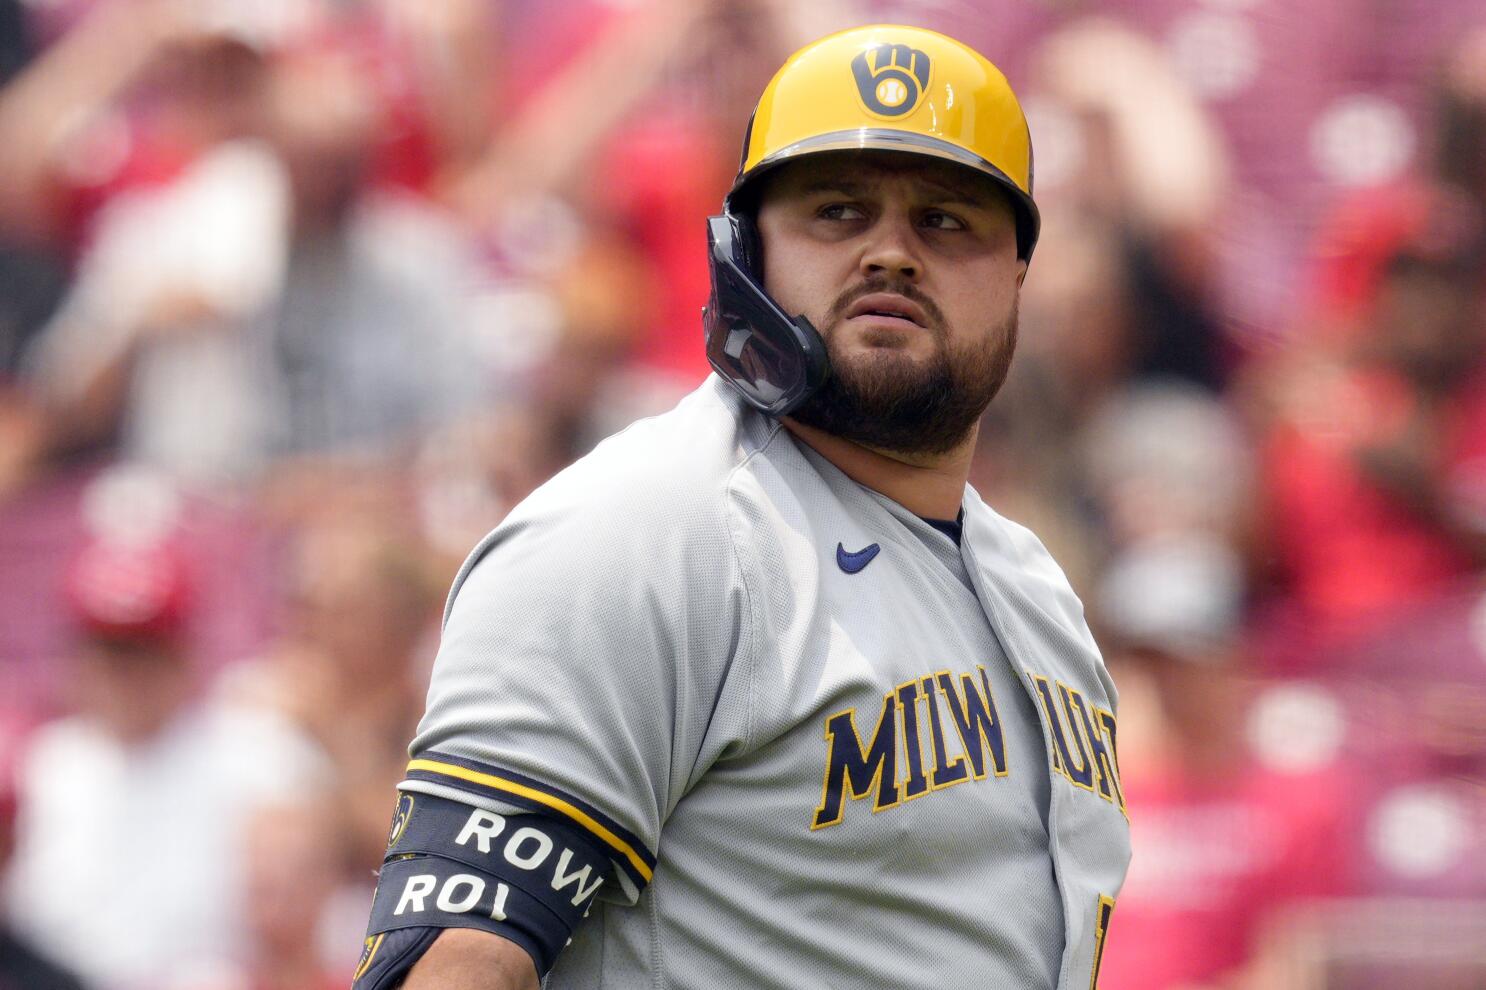 He can't explain it, but Brewers first baseman Rowdy Tellez has Red Sox'  number - The Boston Globe